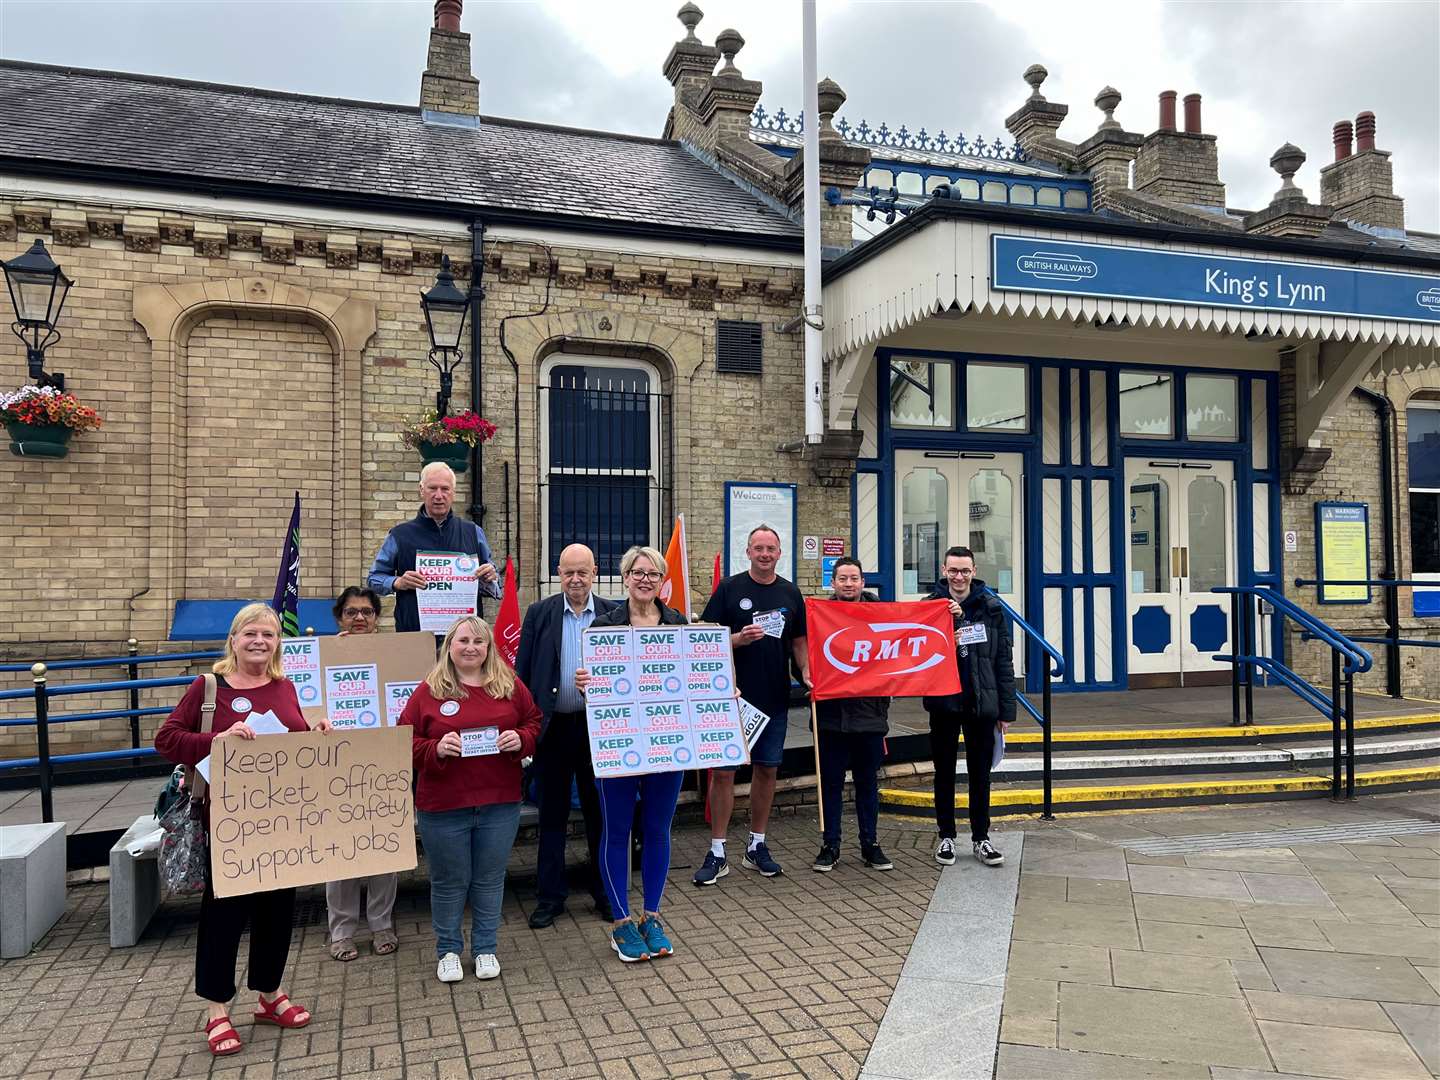 Campaigners who gathered outside Lynn rail station are calling for a reversal of plans to close ticket offices across the country